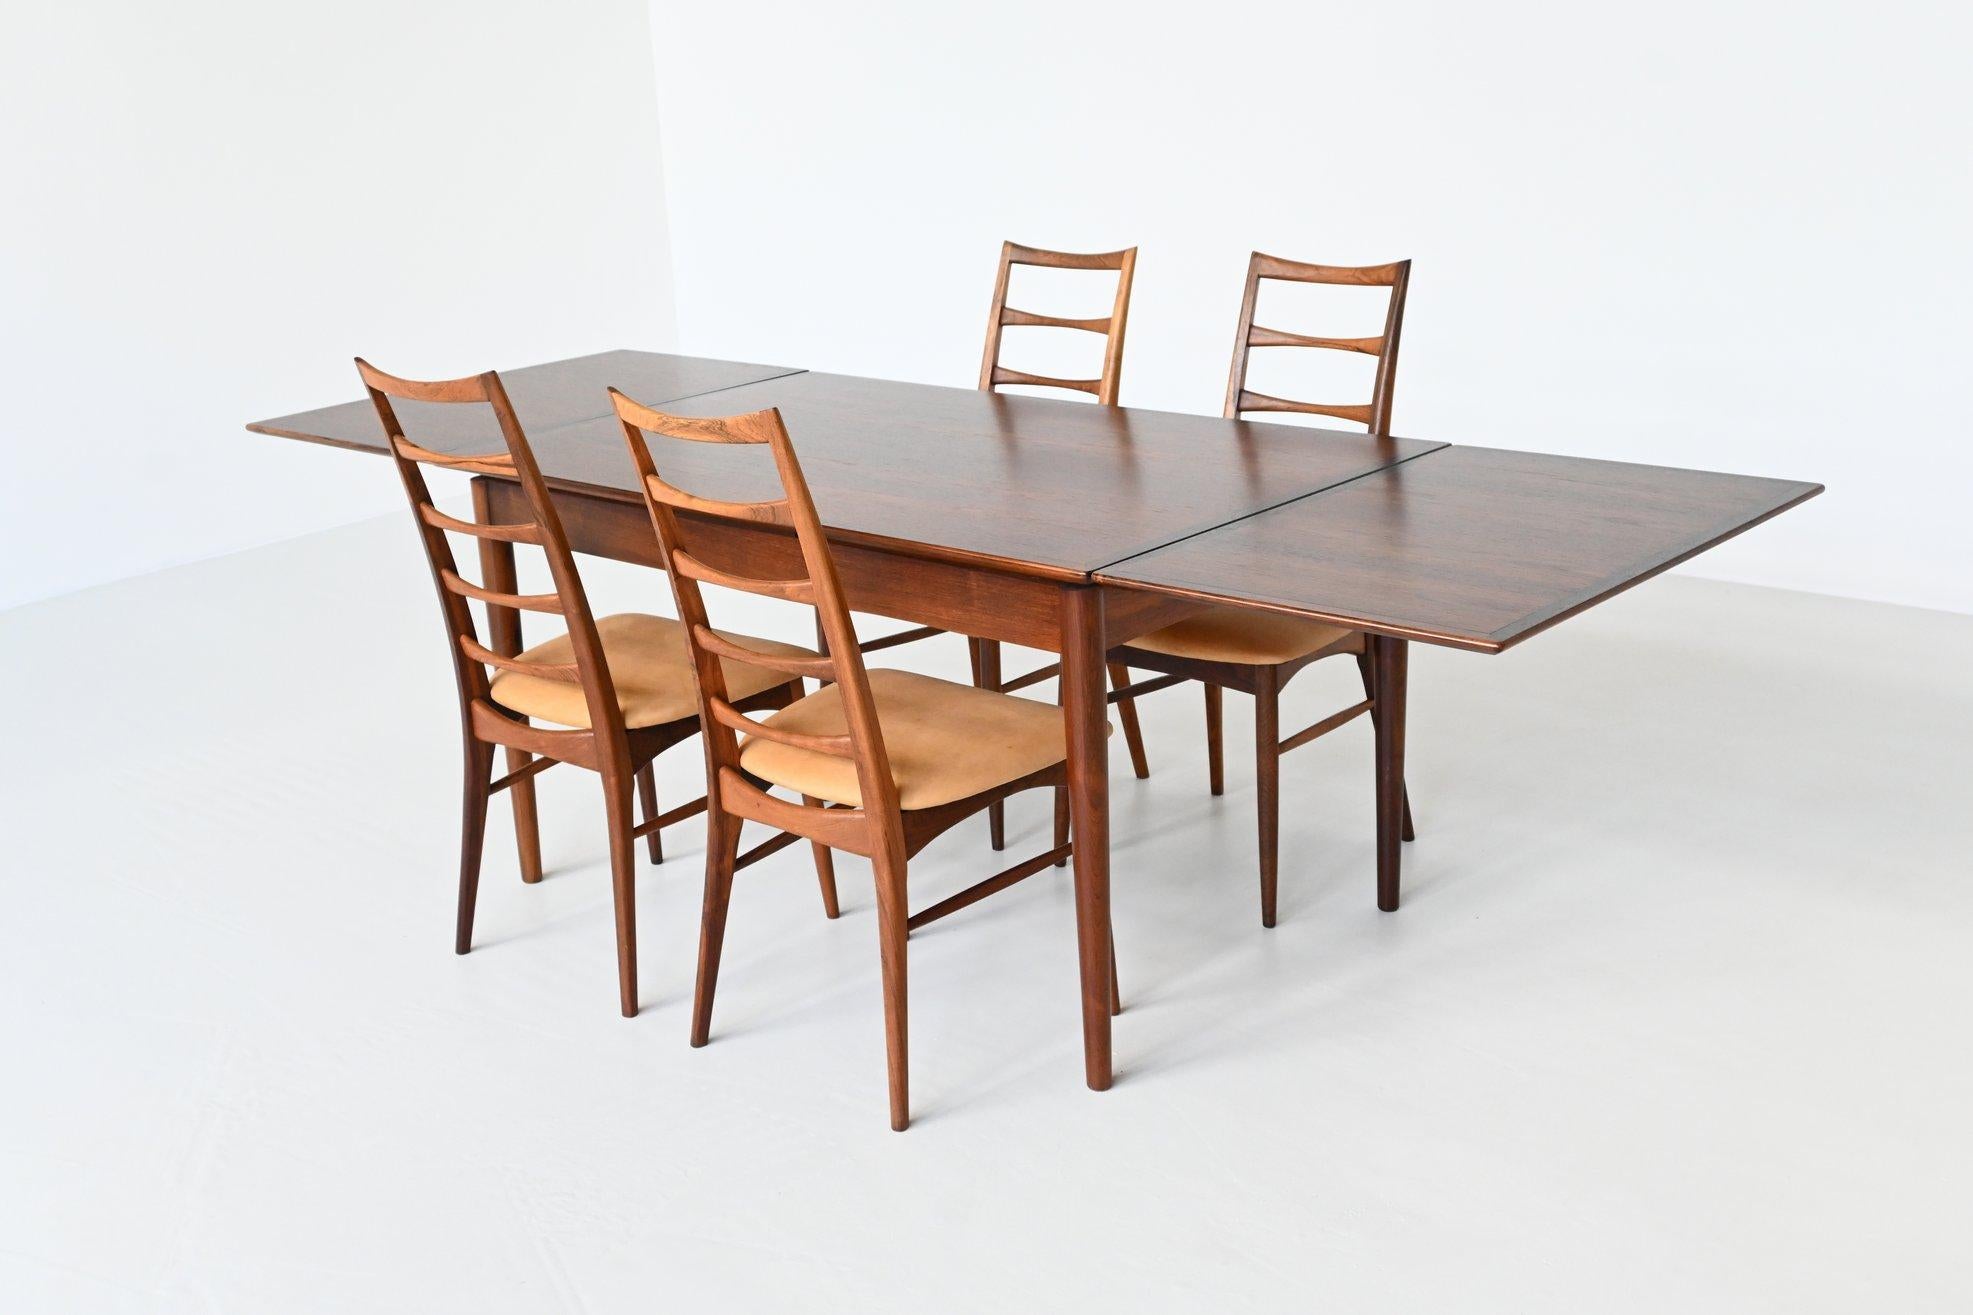 Beautiful crafted rosewood extendable dining table manufactured by Hornslet Mobelfabrik A/S, Denmark 1960. This table is made of rosewood and has an amazing grain to the warm rosewood veneer. It can be extended from 135 cm to 245 cm by pulling out